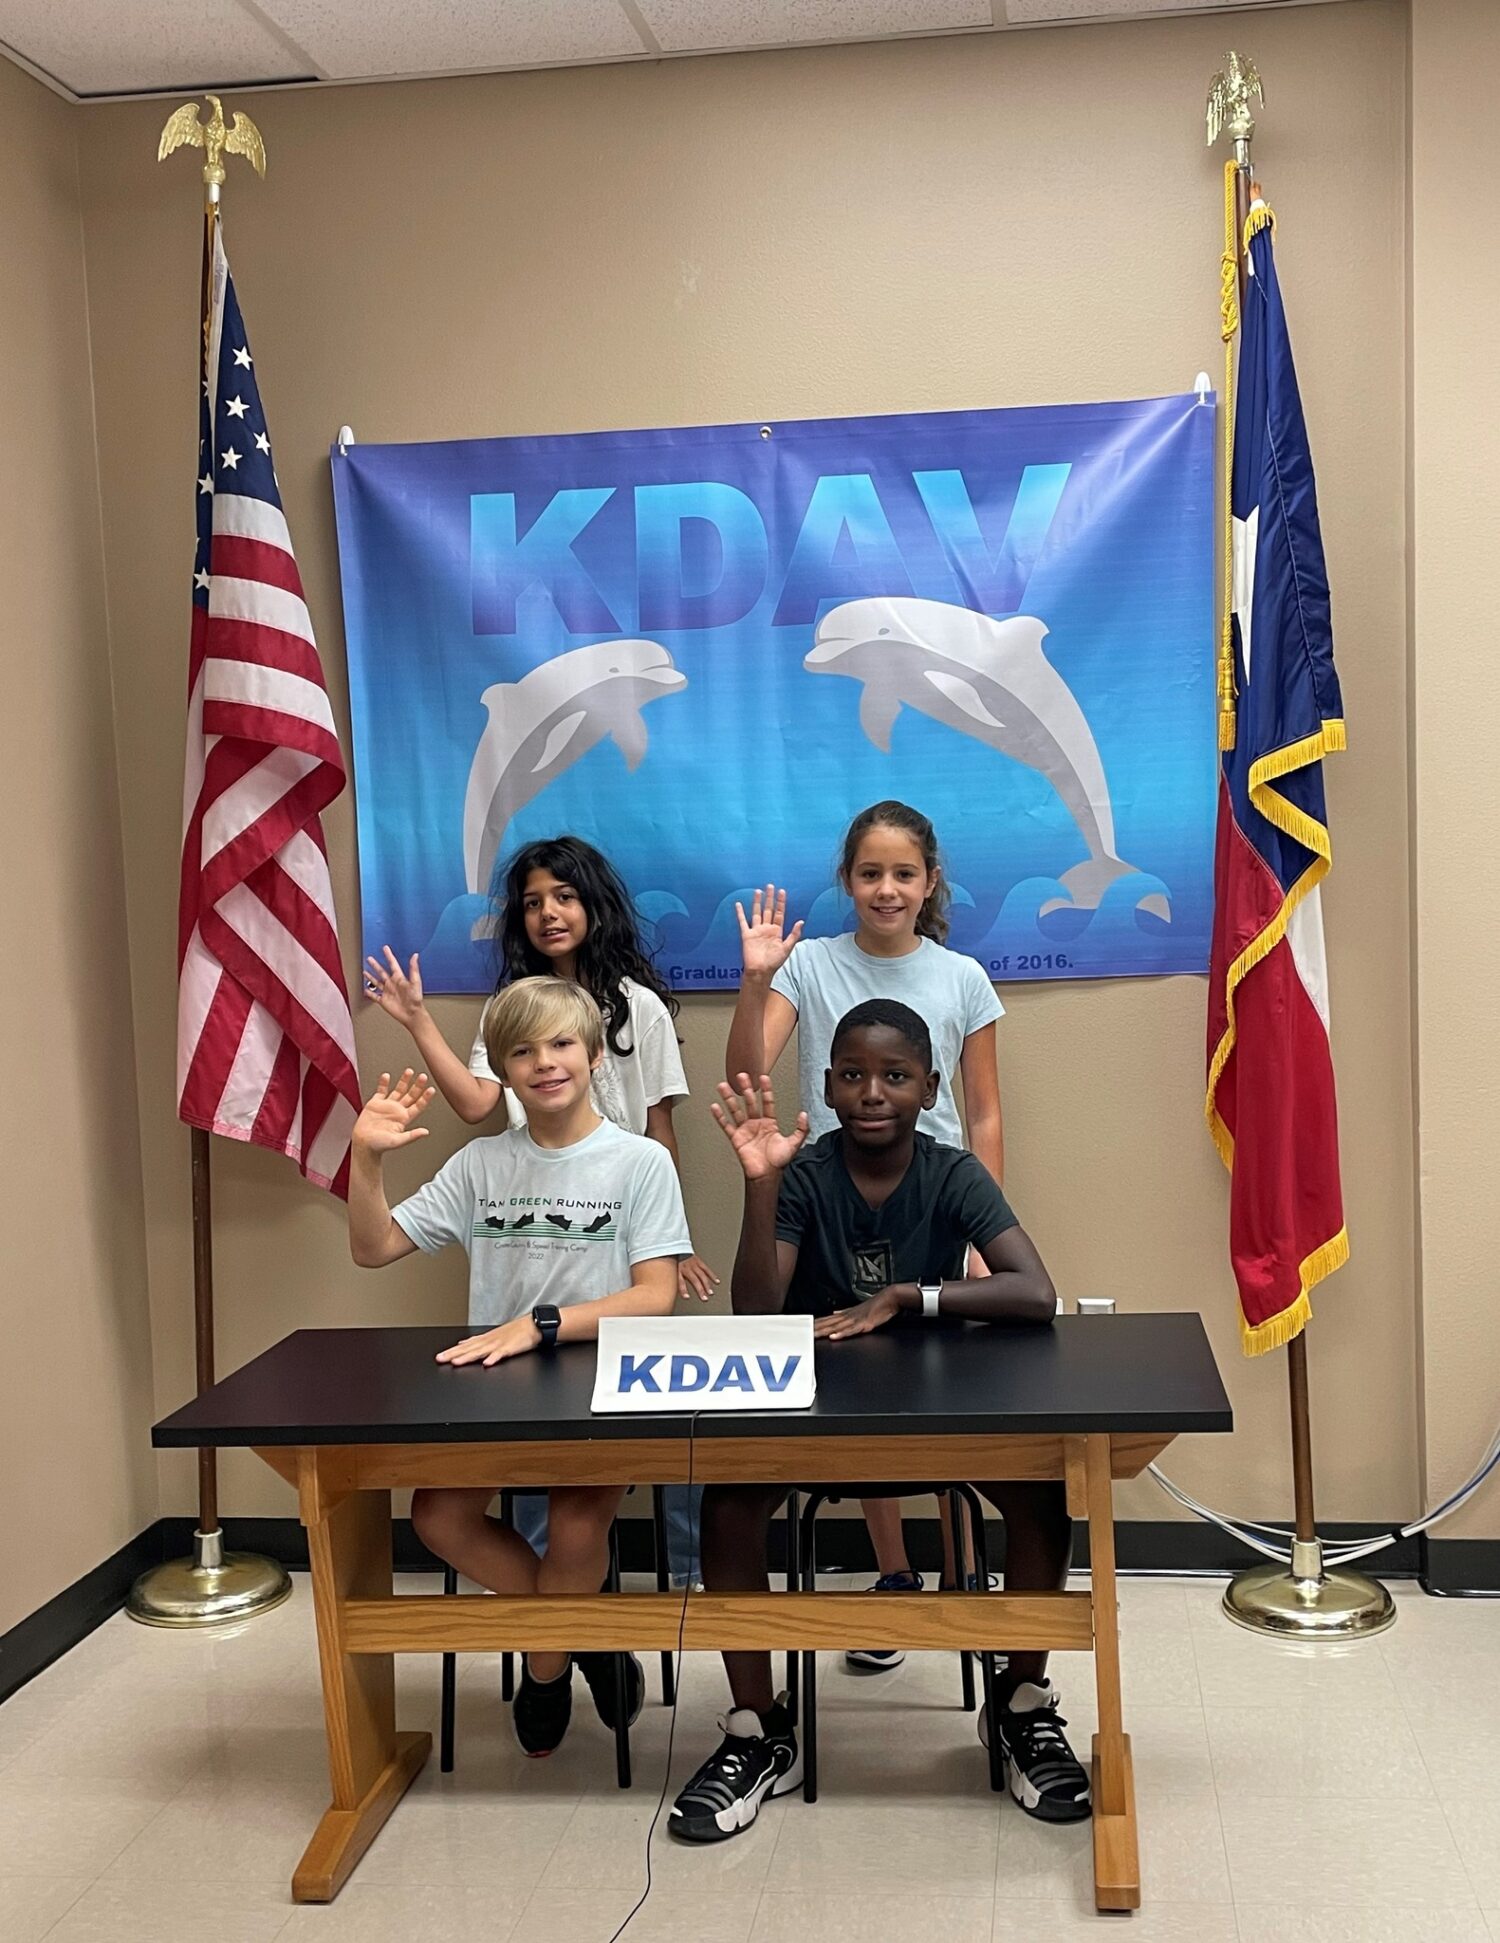 David Elemntary students lead the pledges and read the announcements on KDAV.